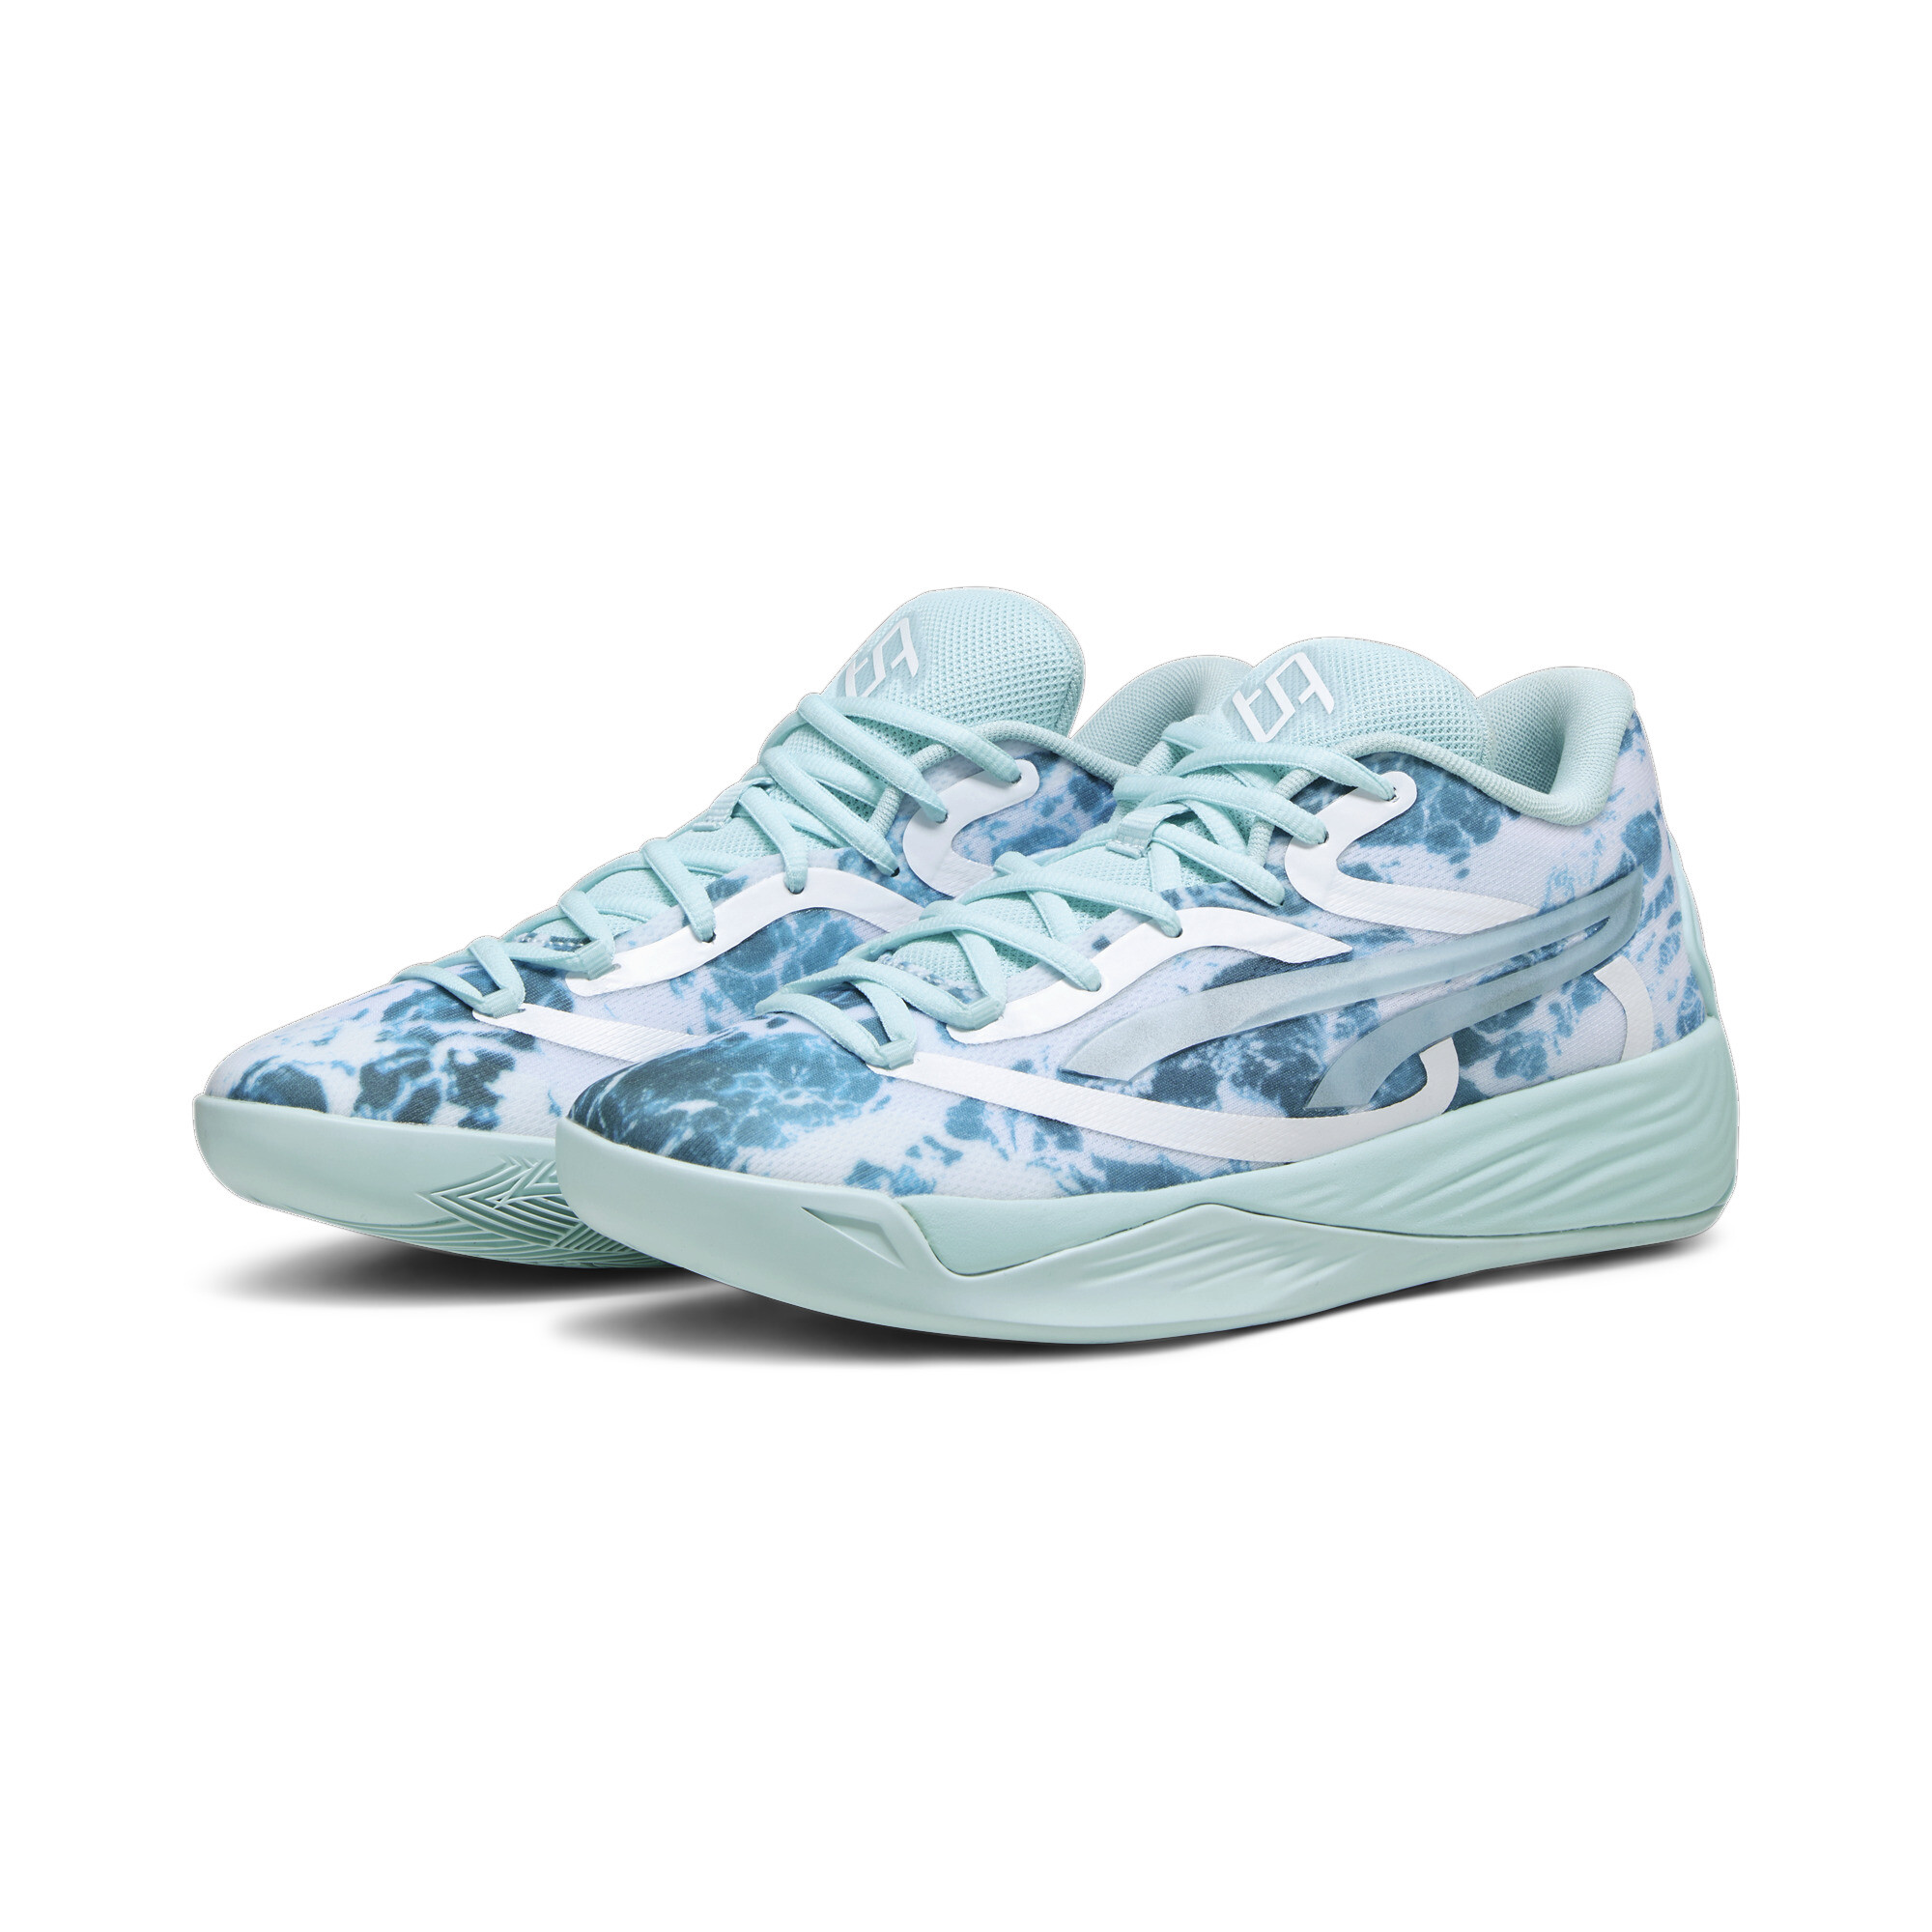 Women's Puma Stewie 2 Water's Basketball Shoes, Blue, Size 44.5, Shoes